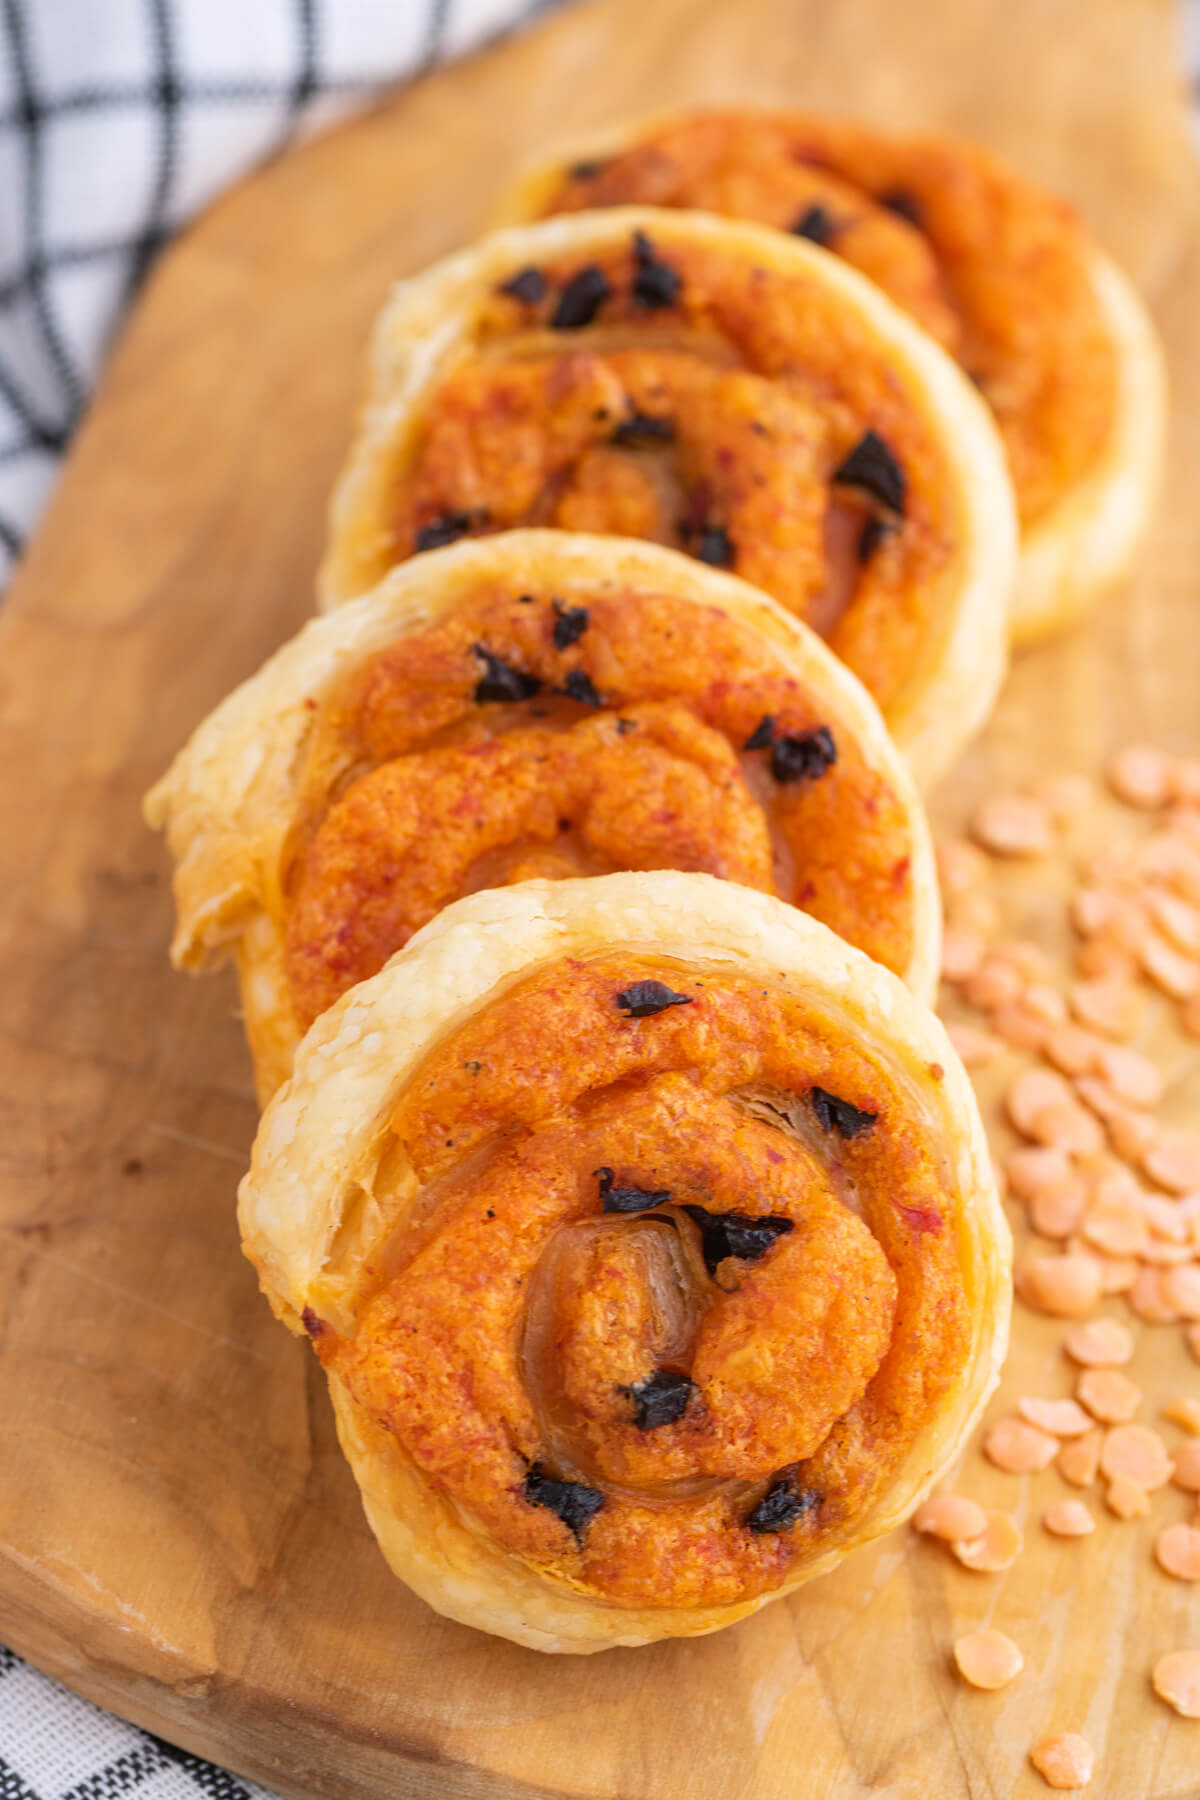 A row of golden baked puff pastry pinwheels on a wooden board garnished with red lentils.